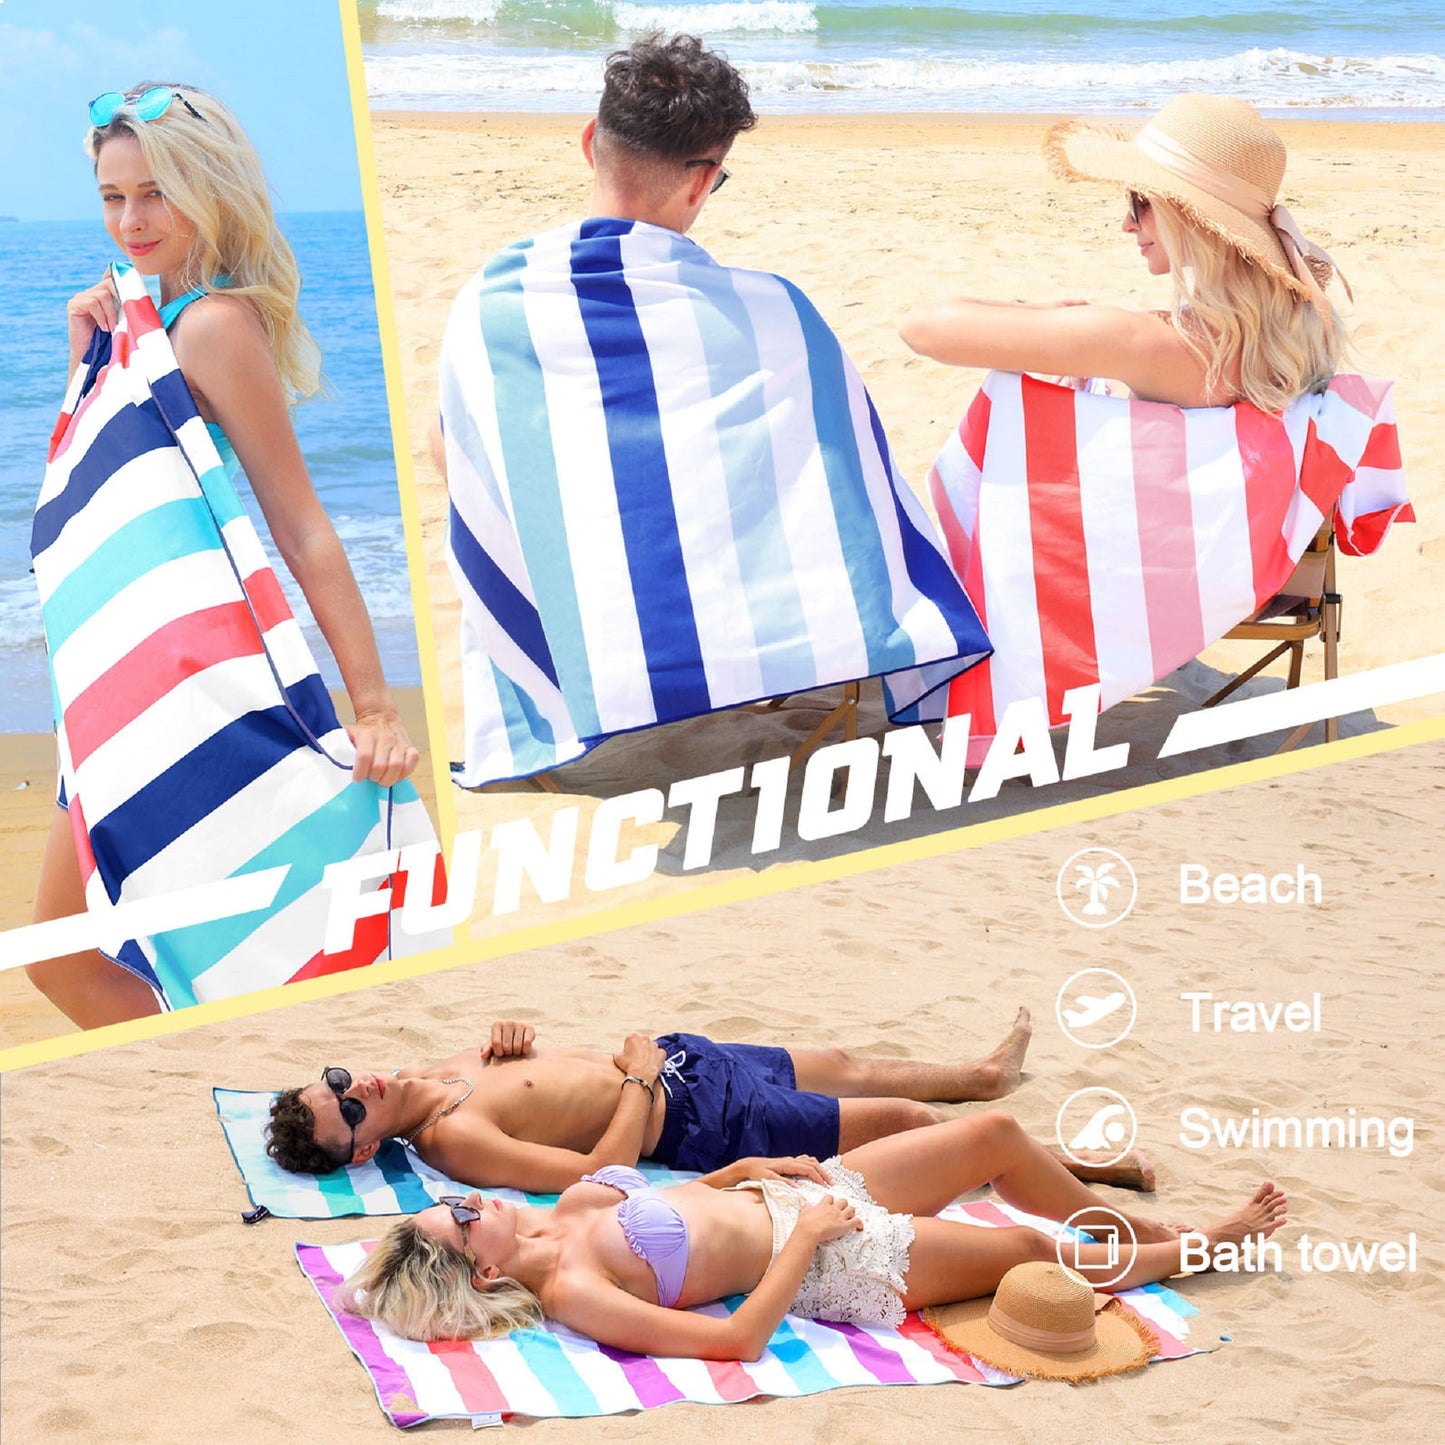 Exclusivo Mezcla Microfiber Quick Dry Beach Towel, Oversized Sand Free Beach Towel for Travel/ Camping/ Sports (Striped Navy, 35"X70") - Super Absorbent, Compact and Lightweight